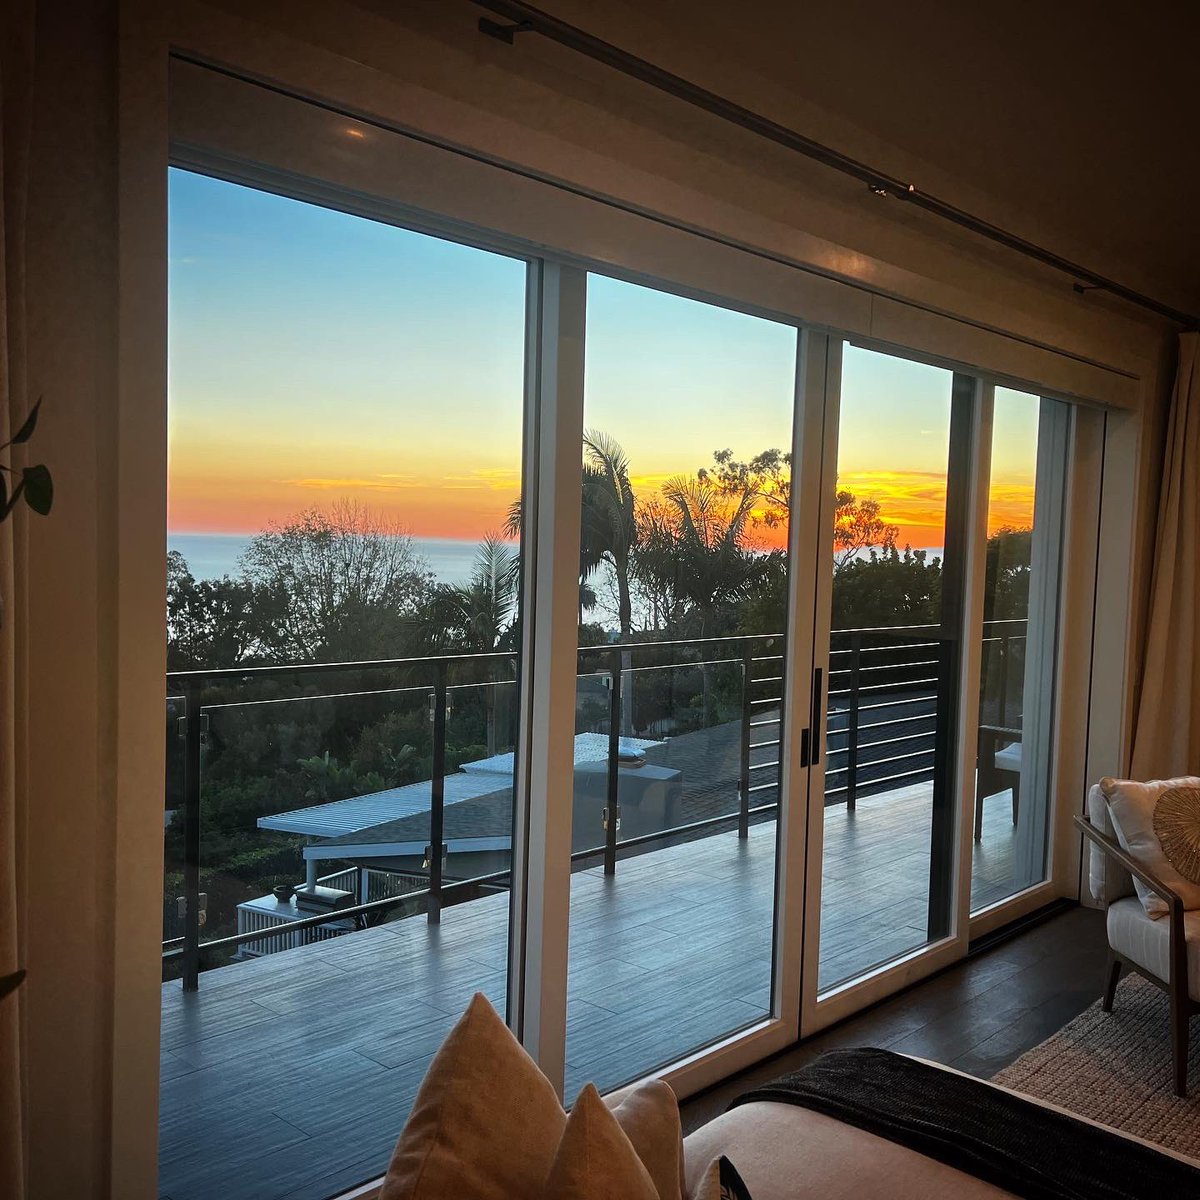 SOLD | #CONGRATULATIONS to our team member Jennifer Gallagher on the closing!

📍1797 TEMPLE HILLS, LAGUNA BEACH

Connect with us to learn more 949-922-9552⁣⁣
⁣⁣⁣livelrealestate.com⁣⁣⁣⁣⁣⁣⁣ 

#1797TempleHills #justsold #lagunabeach #oceanviews #sunset